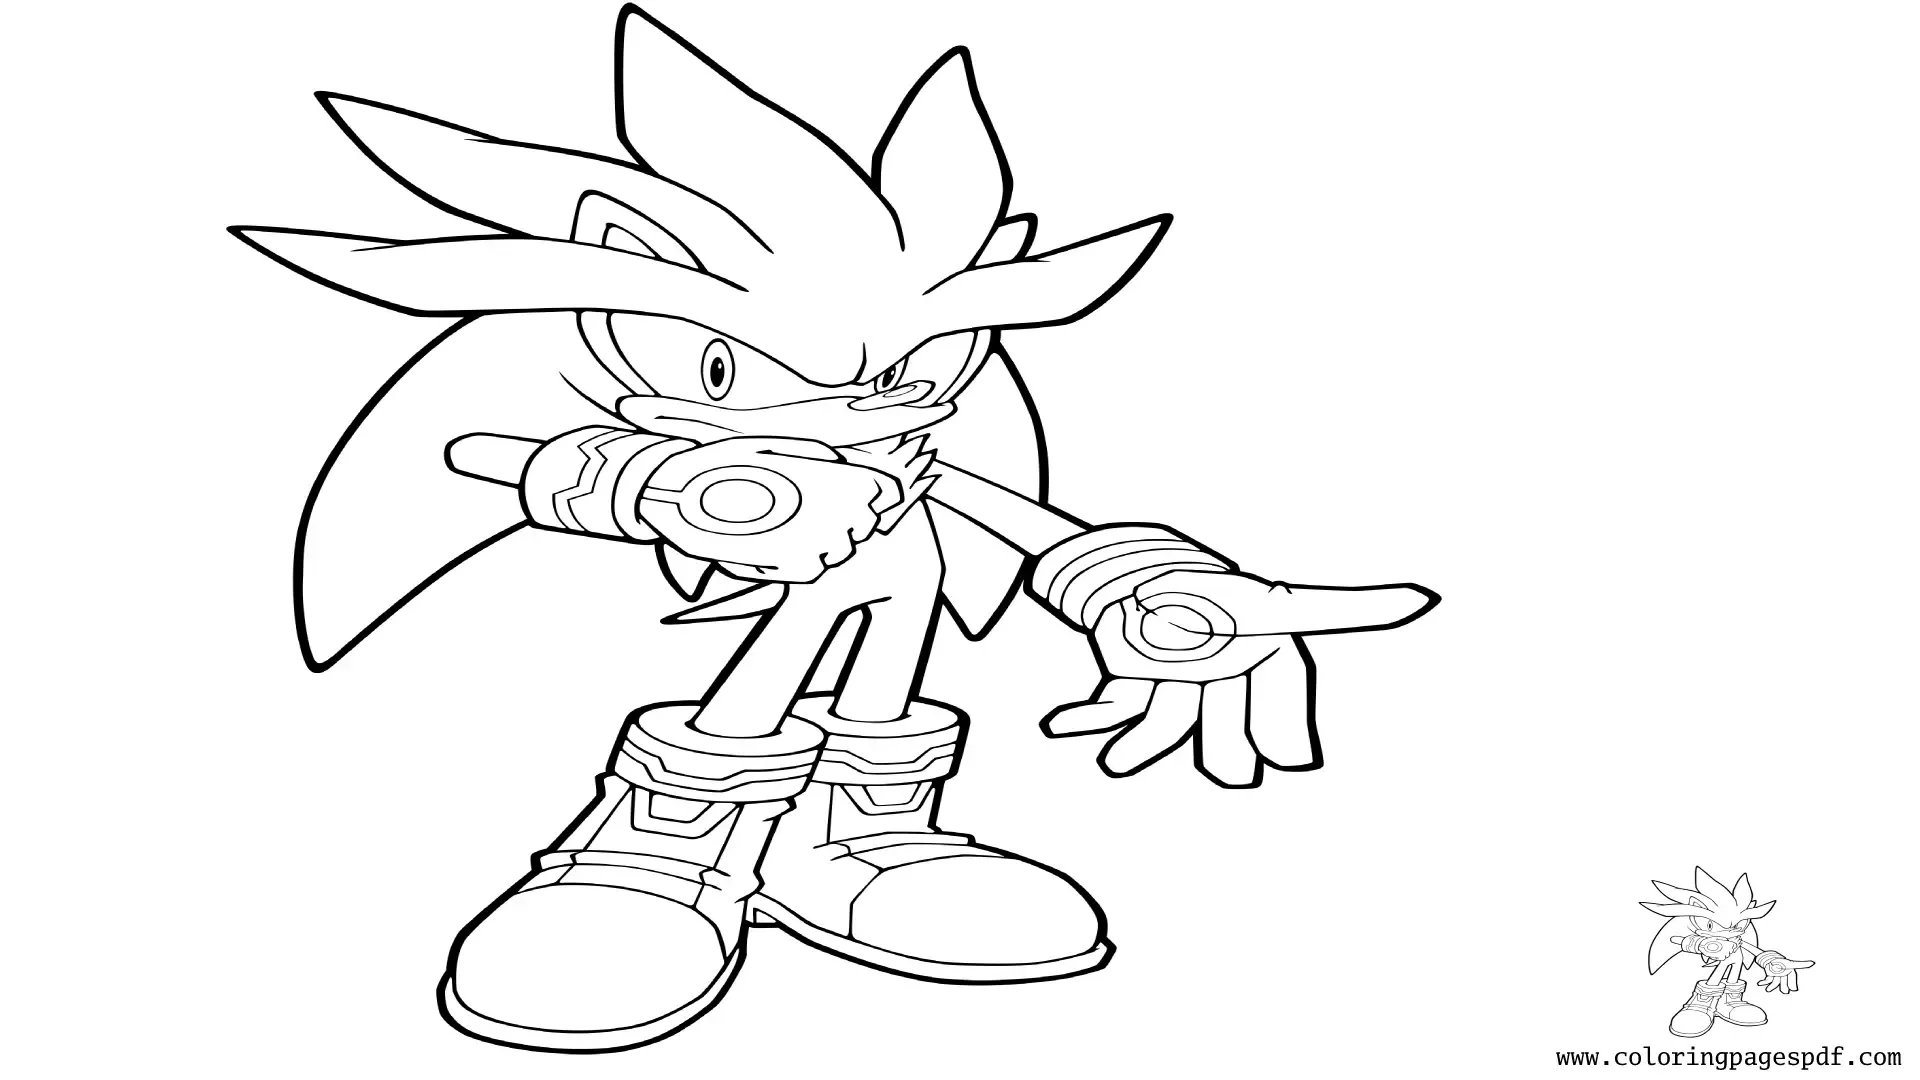 Coloring Page Of Silver The Hedgehog